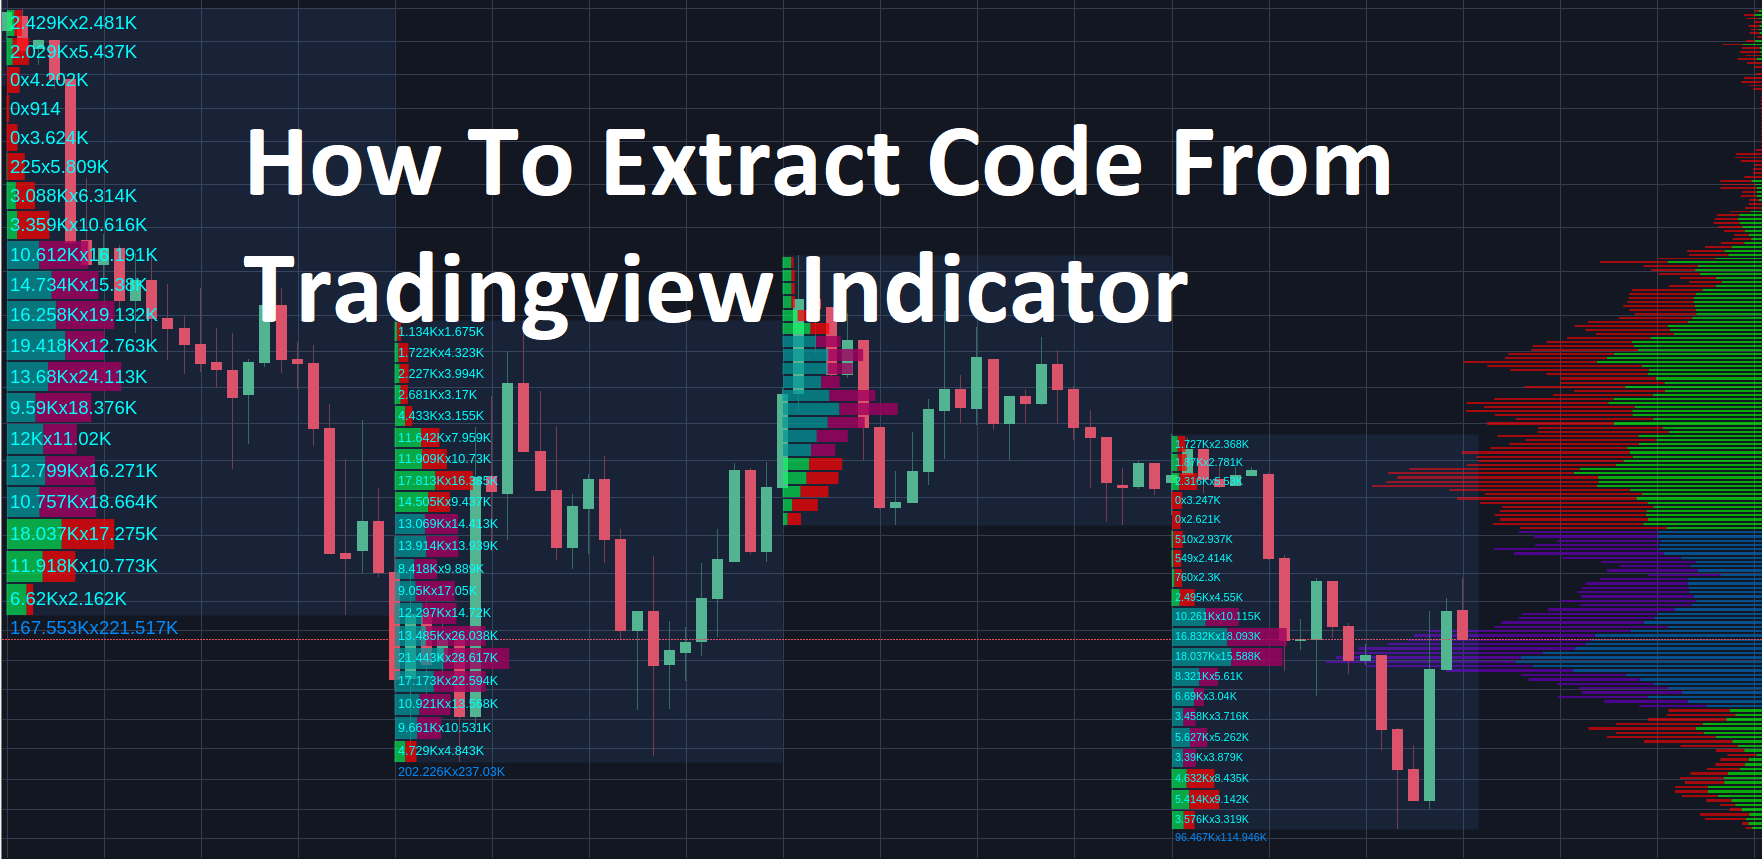 How To Extract Code From Tradingview Indicator